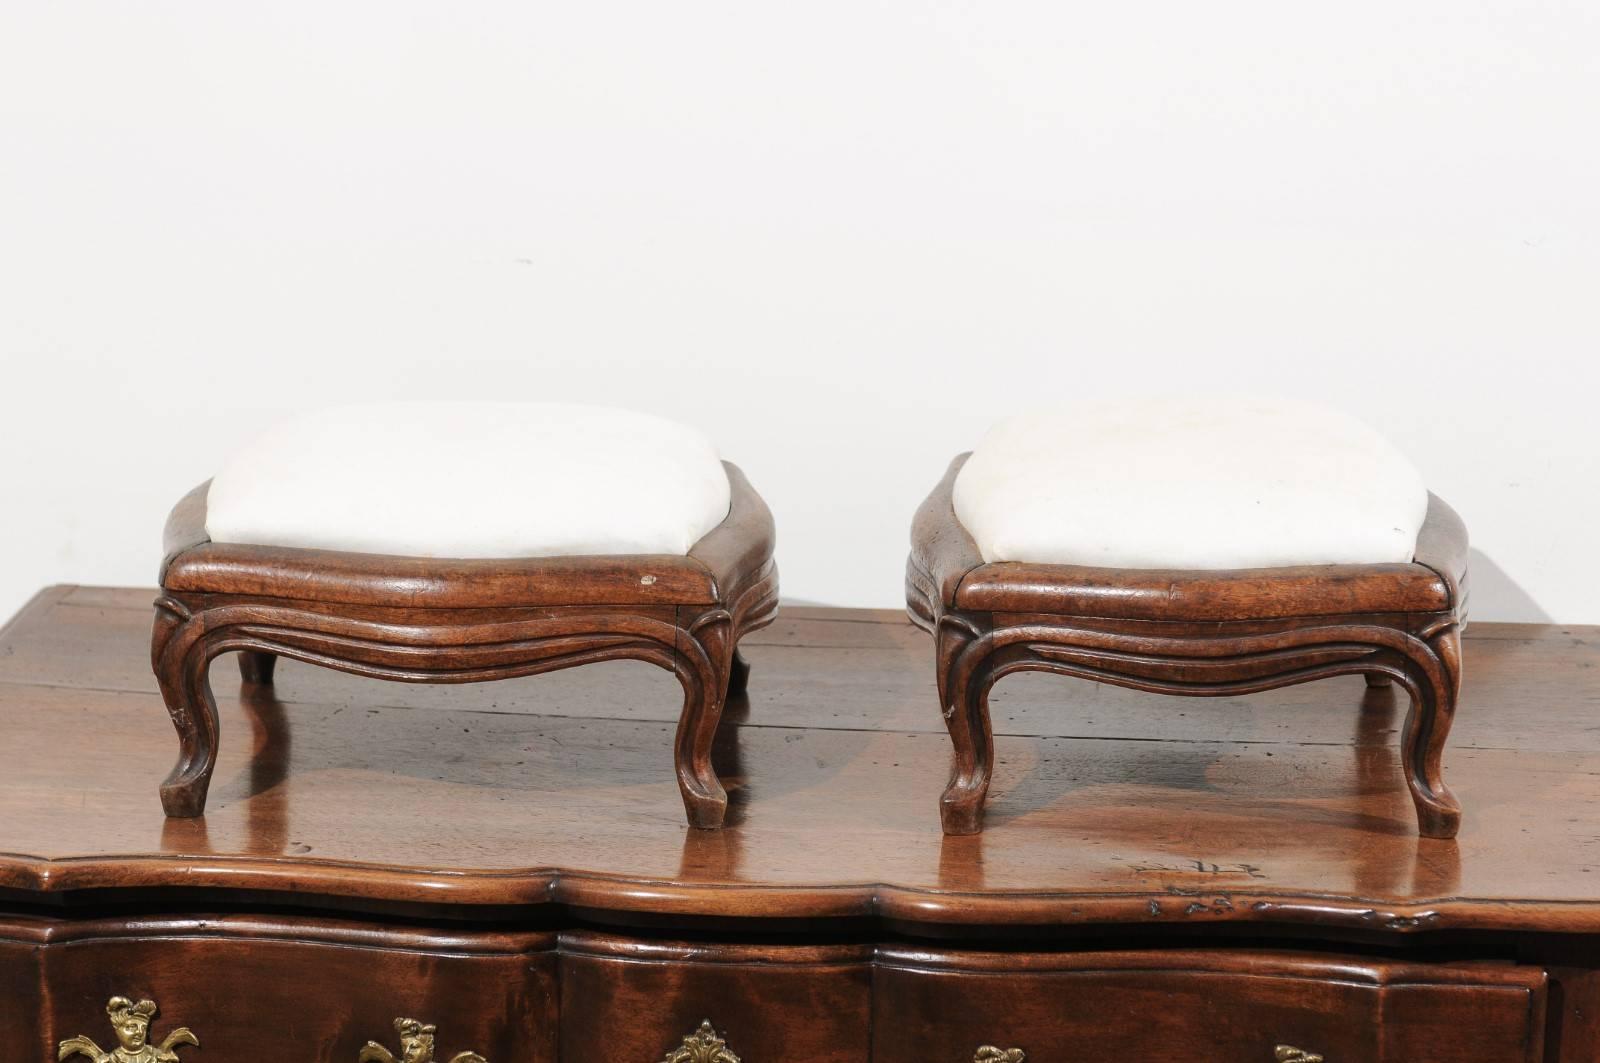 A pair of French Louis XV style walnut footstools from the 19th century with new upholstery. Each of this pair of French stools features a walnut body, carved with delicate sinuous lines. The decor, while understated, is elegant and the stools are